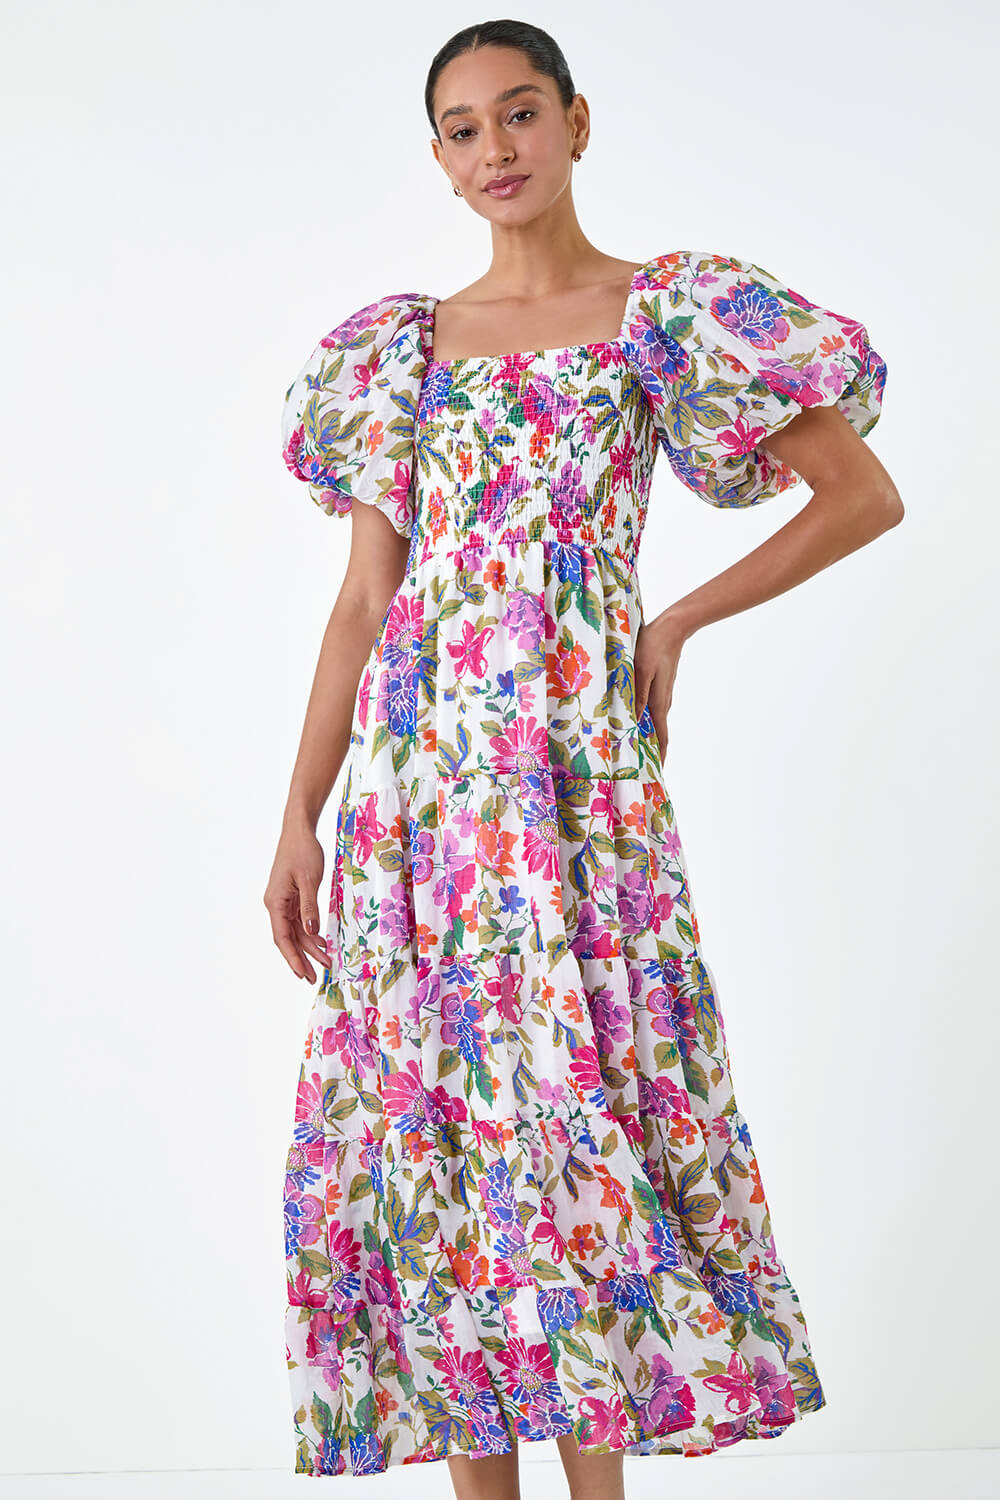 PINK Floral Tiered Puff Sleeve Midi Dress, Image 4 of 5